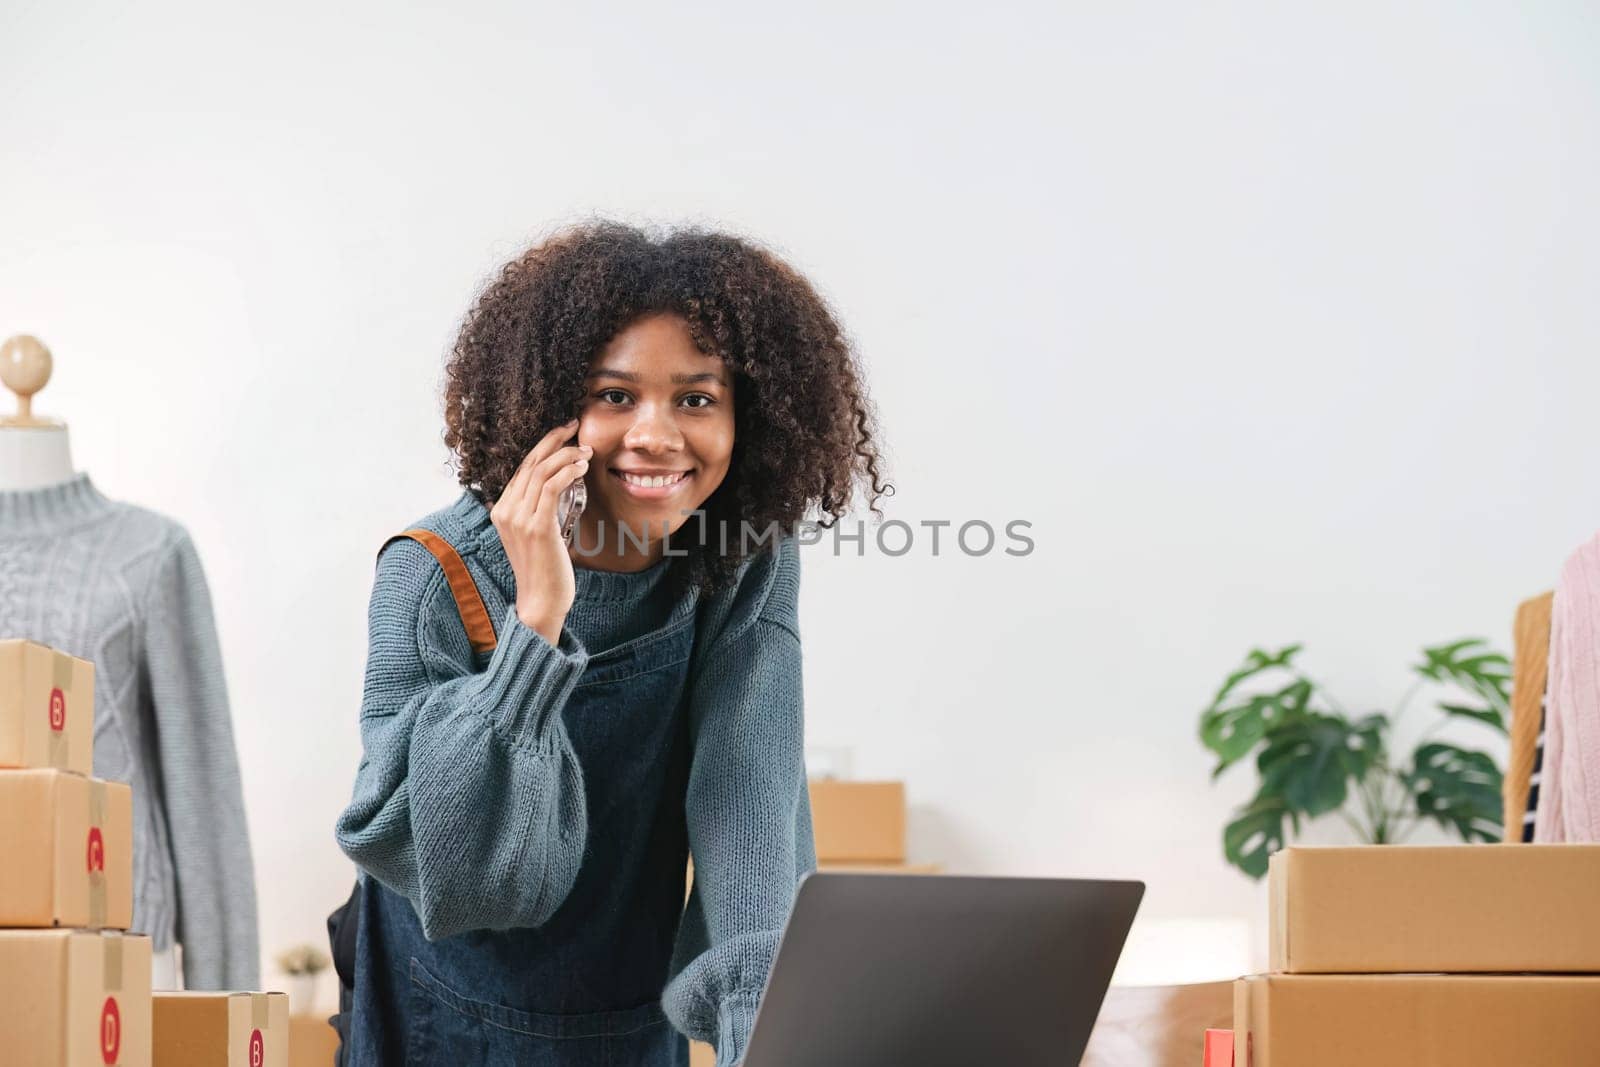 Startup Small business owner entrepreneur. Young asian business woman using mobile phone call receiving purchase order and check product on stock. E-commerce business and shopping online concept...